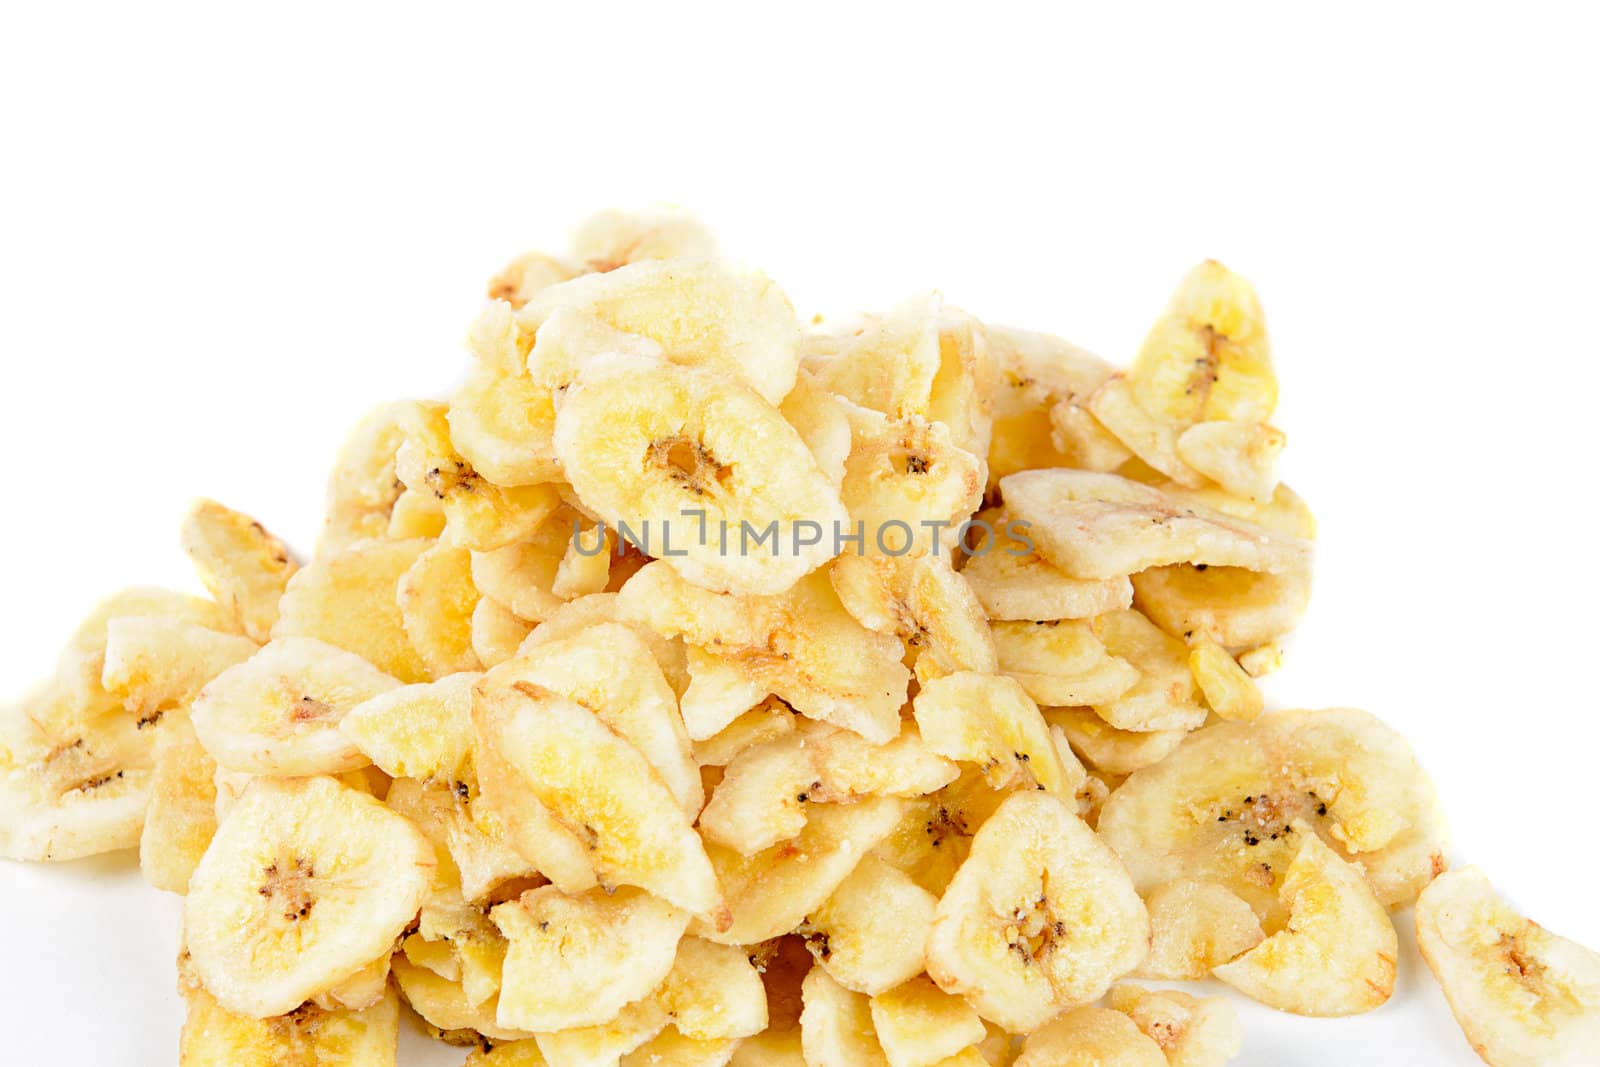 A pile of dried banana chips, isolated against a white background.